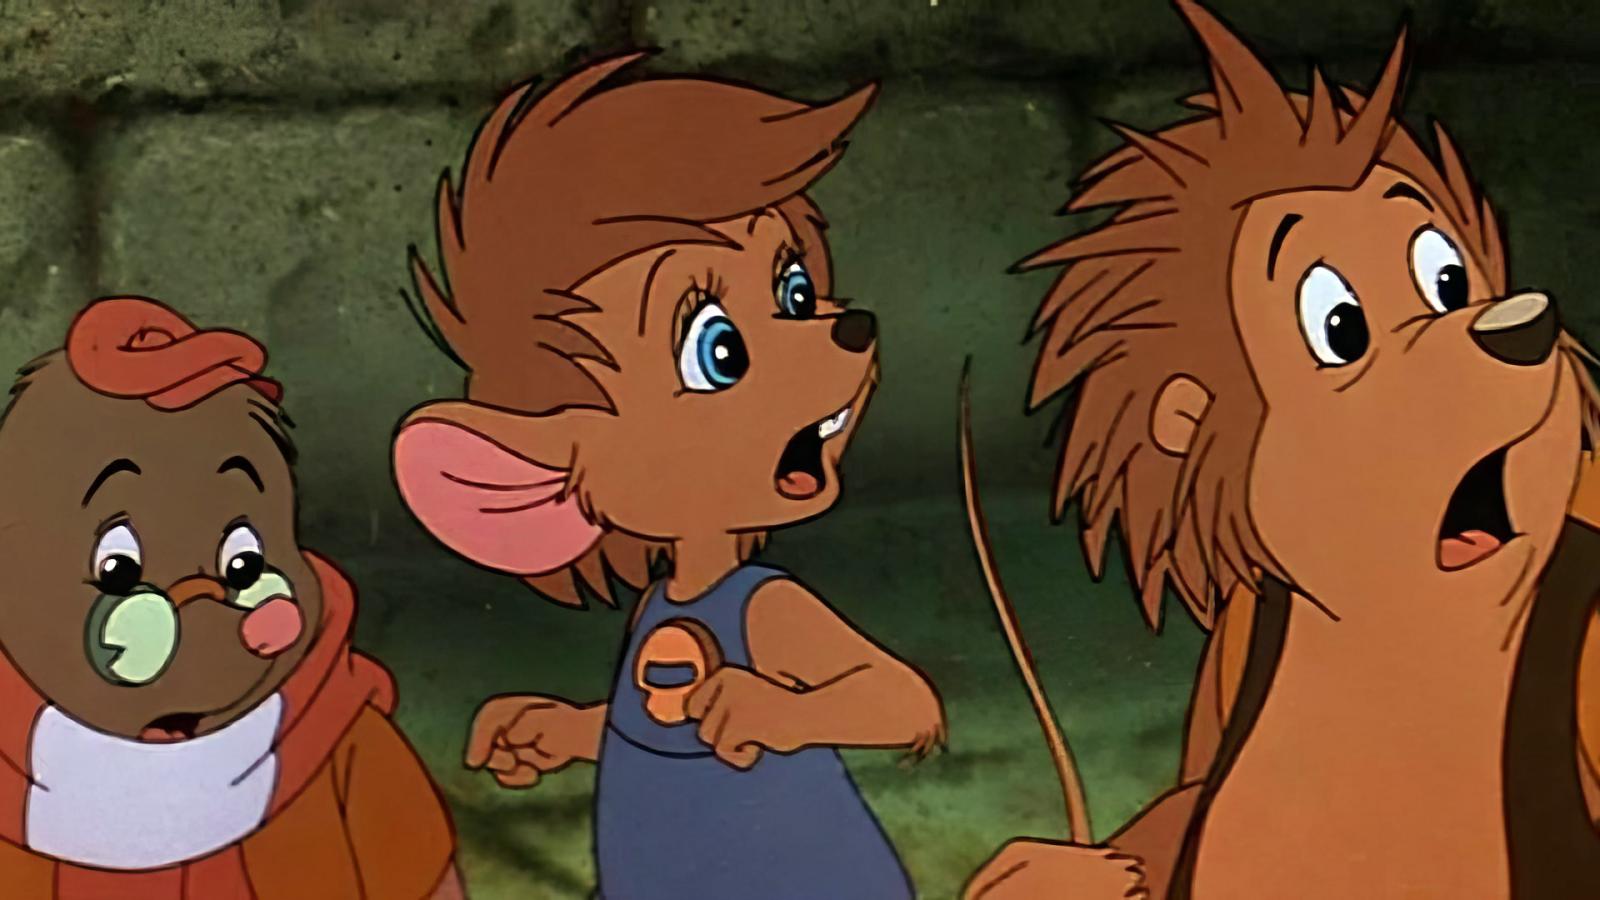 10 Underrated Animated Movies from the '90s You've Missed - image 10